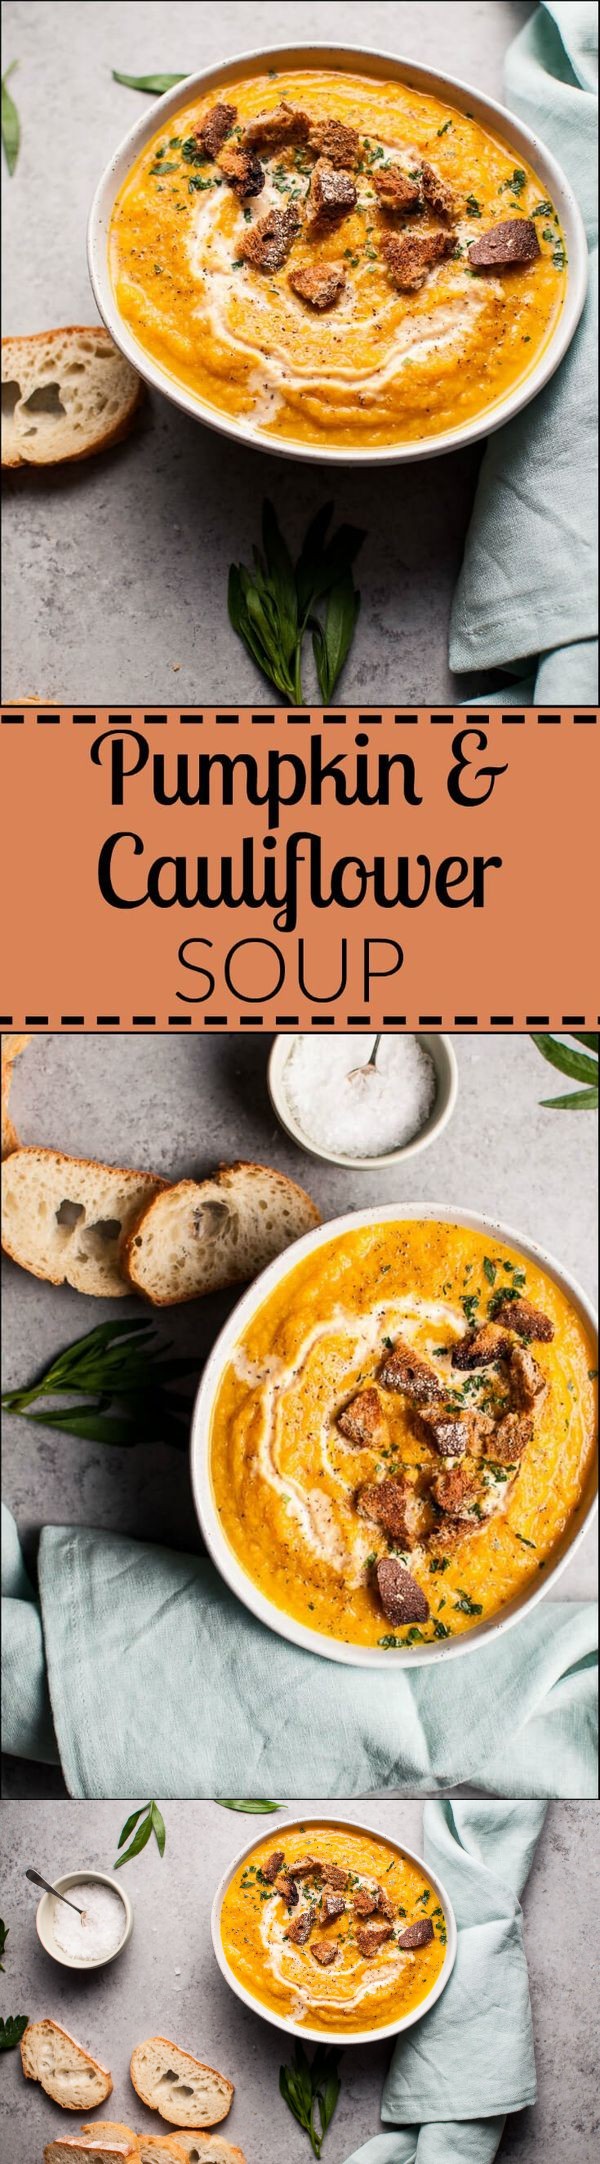 Pumpkin and Cauliflower Soup with Ginger